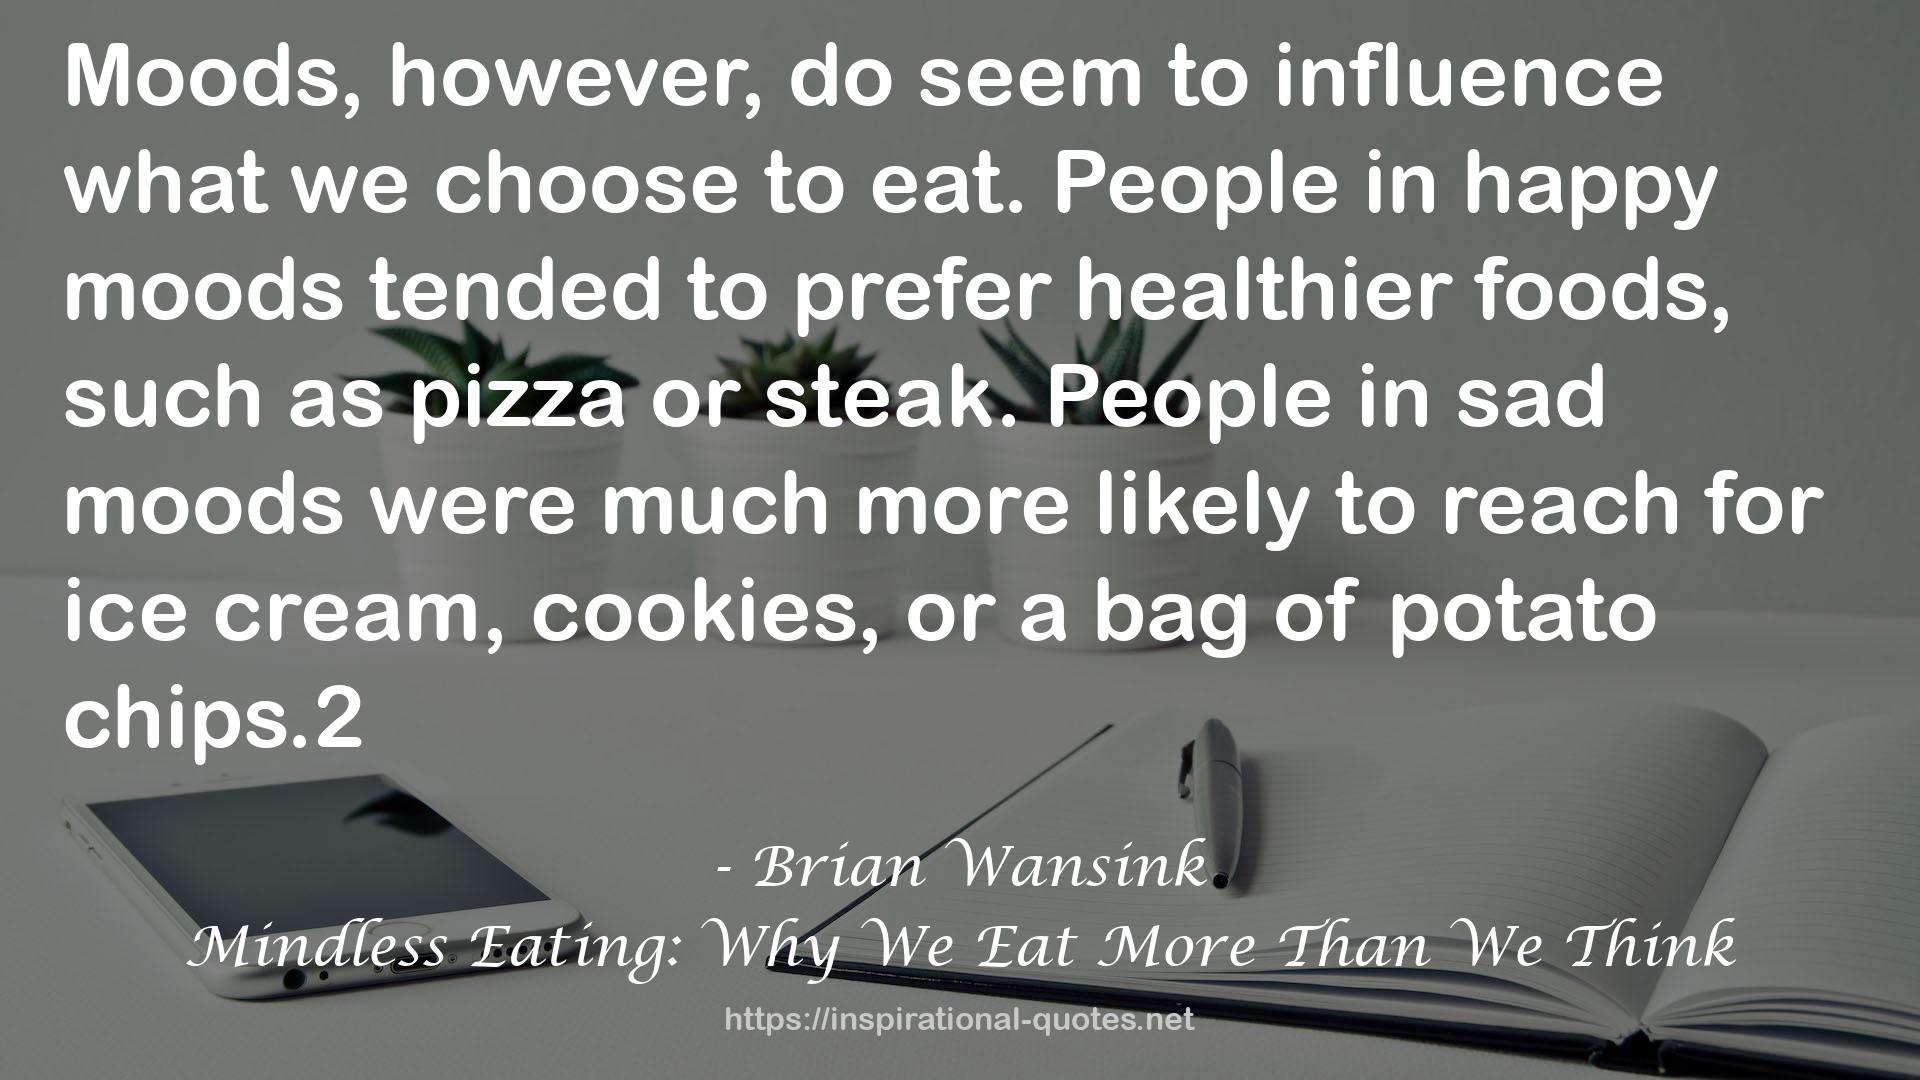 Mindless Eating: Why We Eat More Than We Think QUOTES